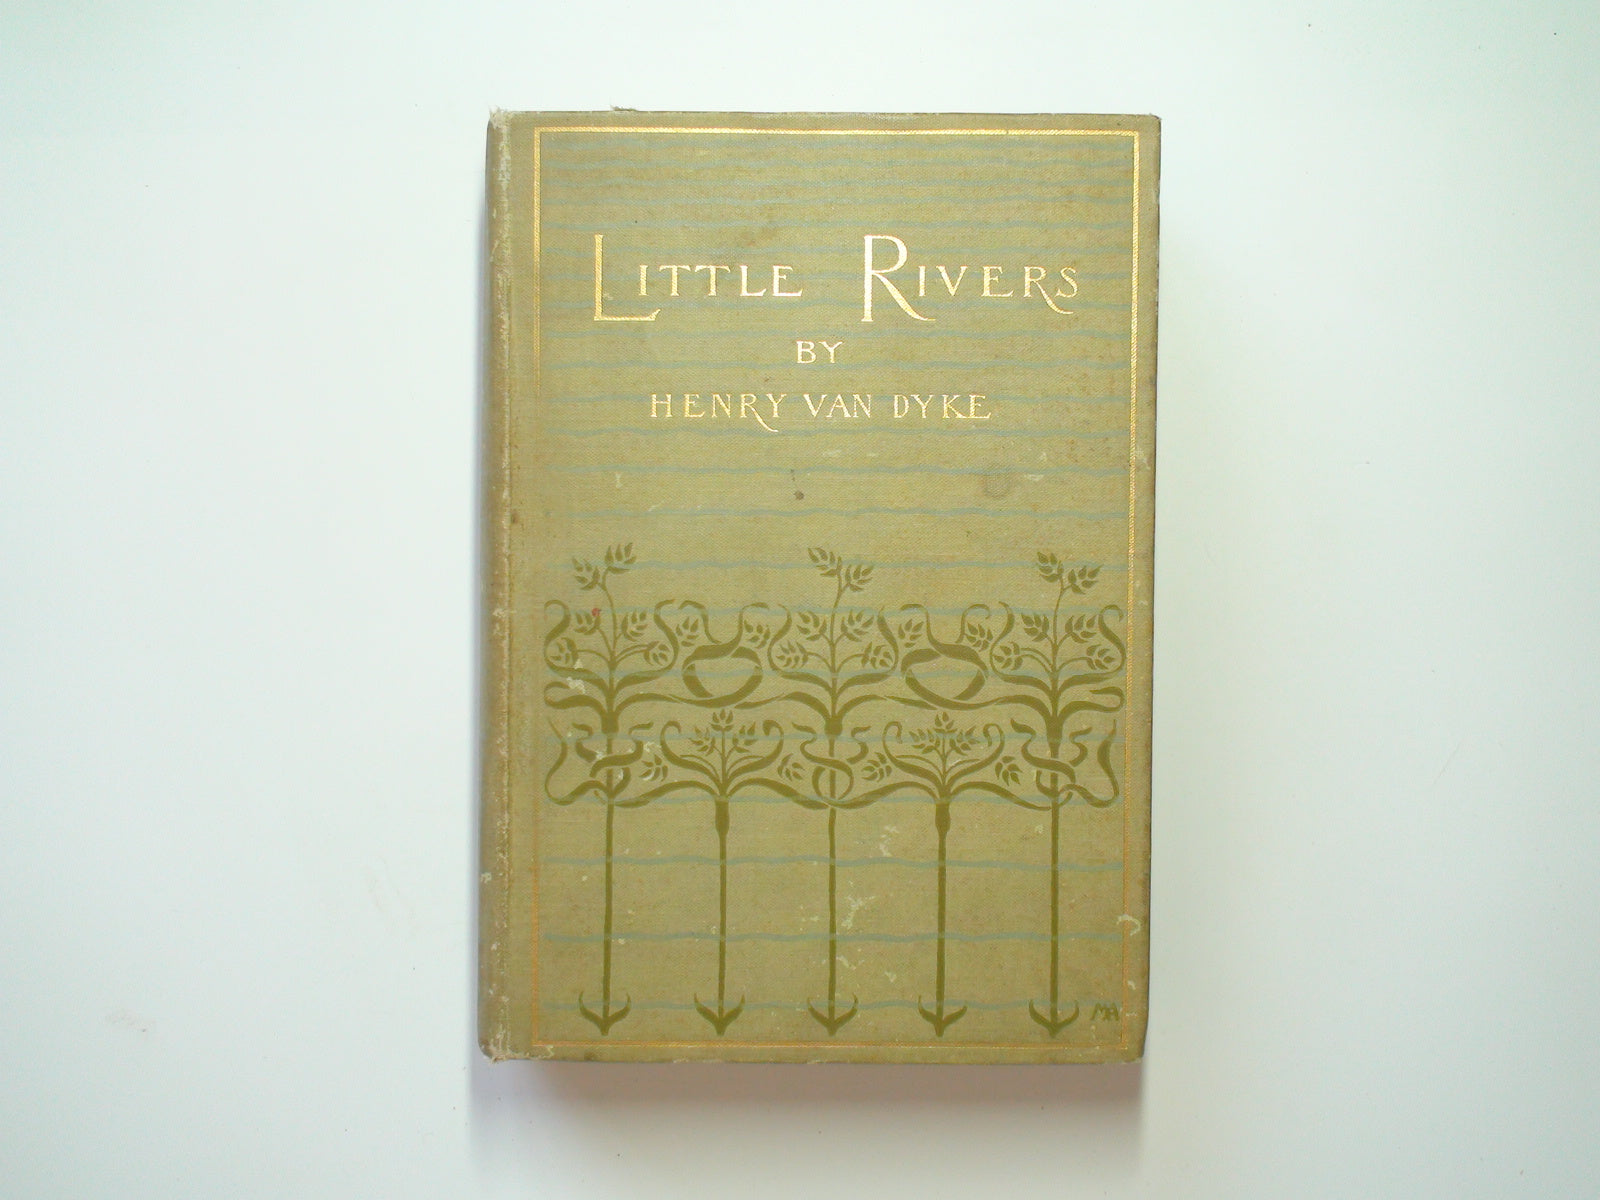 Little Rivers, Henry Van Dyke, Illustrated, Cameo Edition, 1902